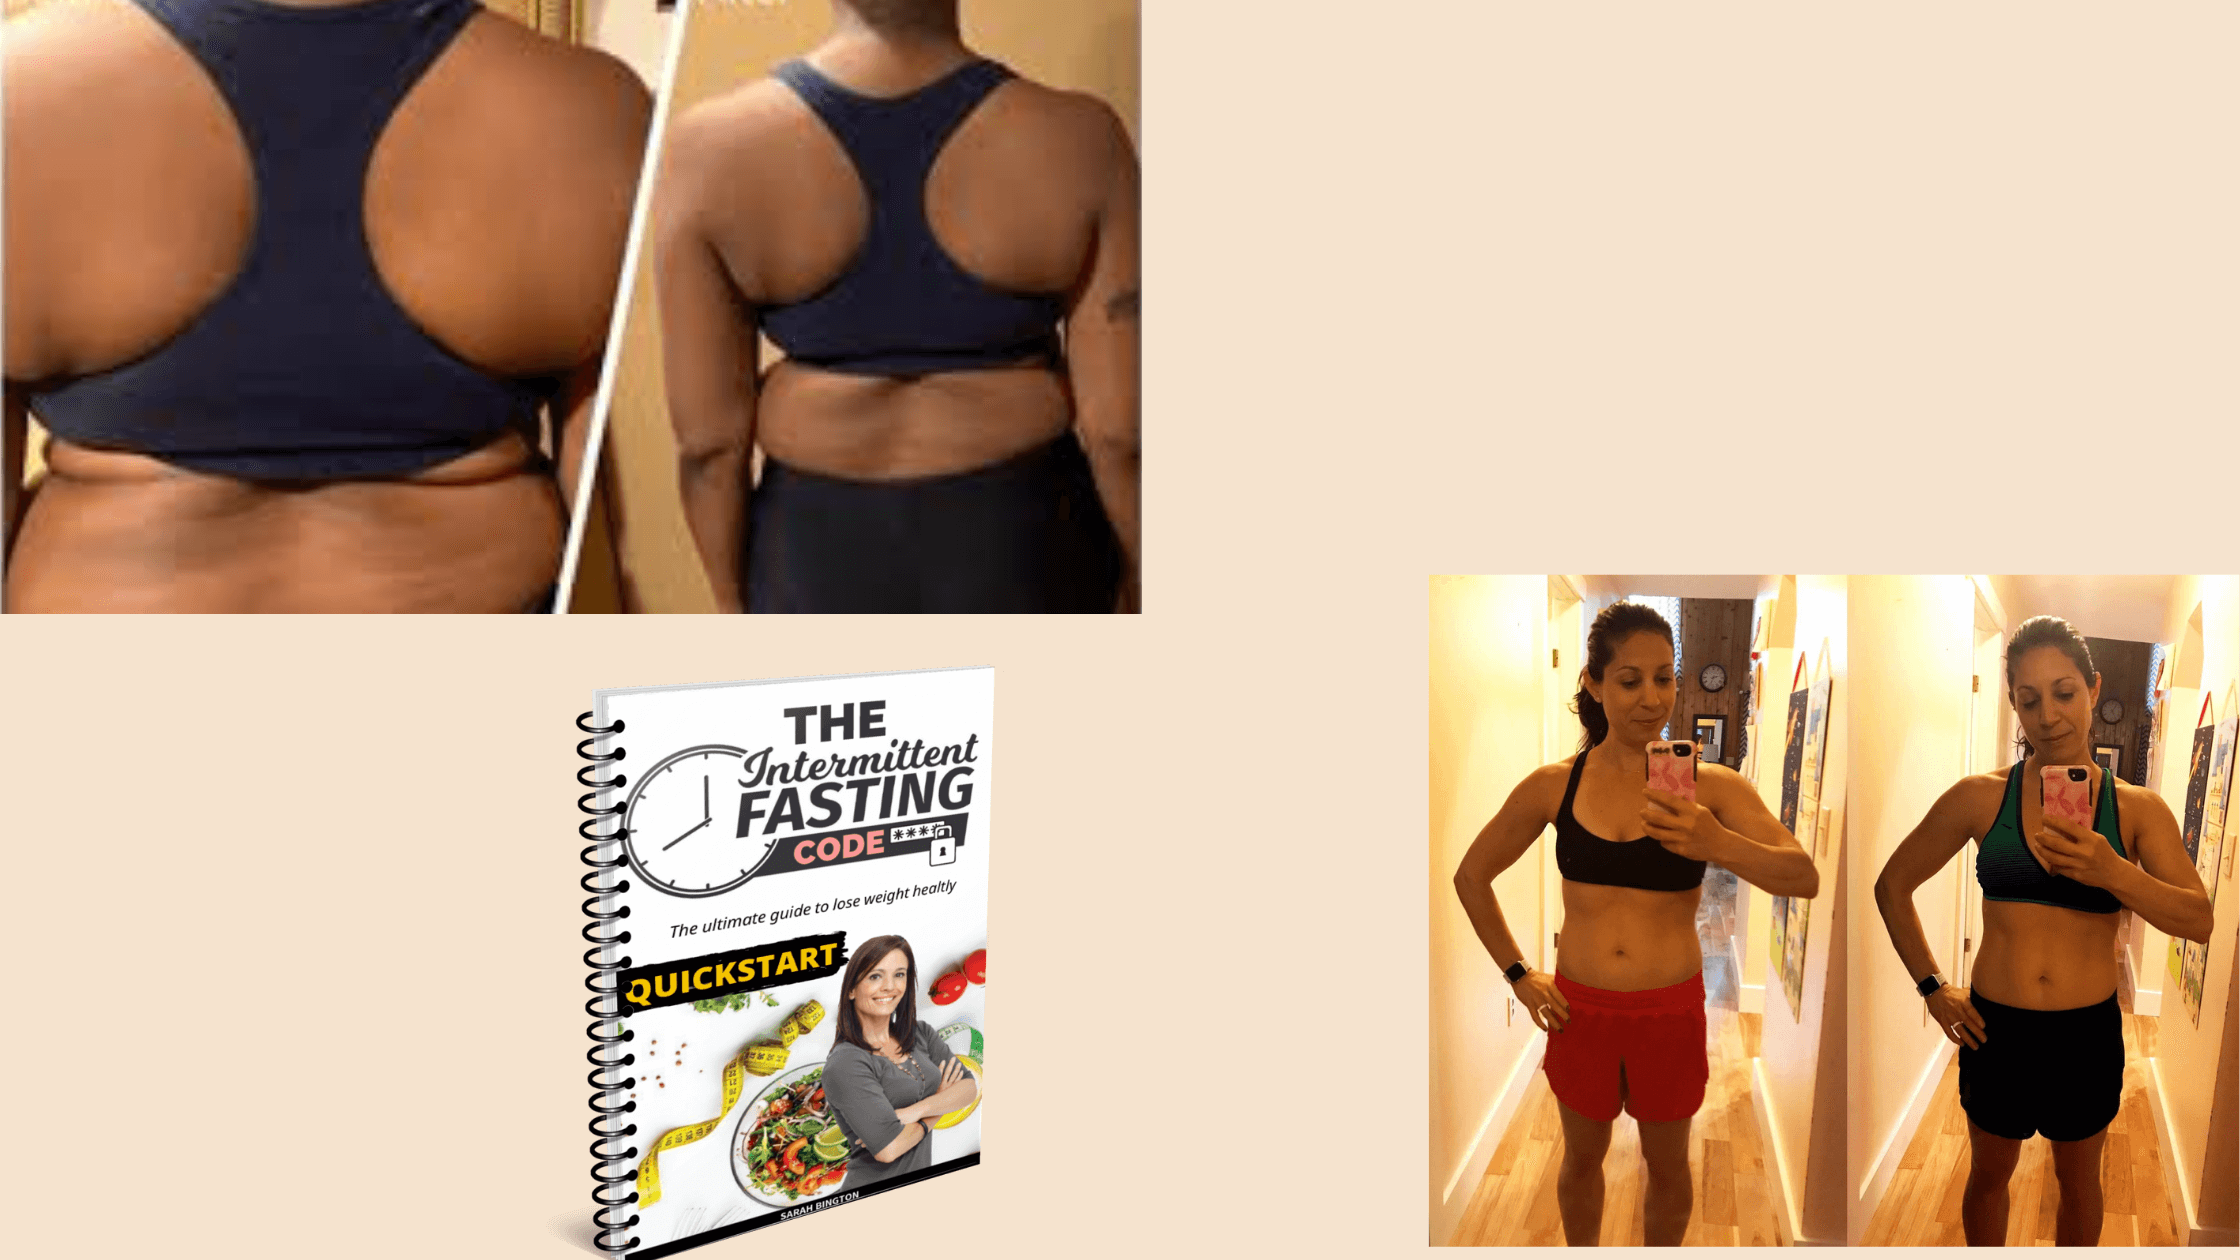 Benefits of The Intermittent Fasting Code